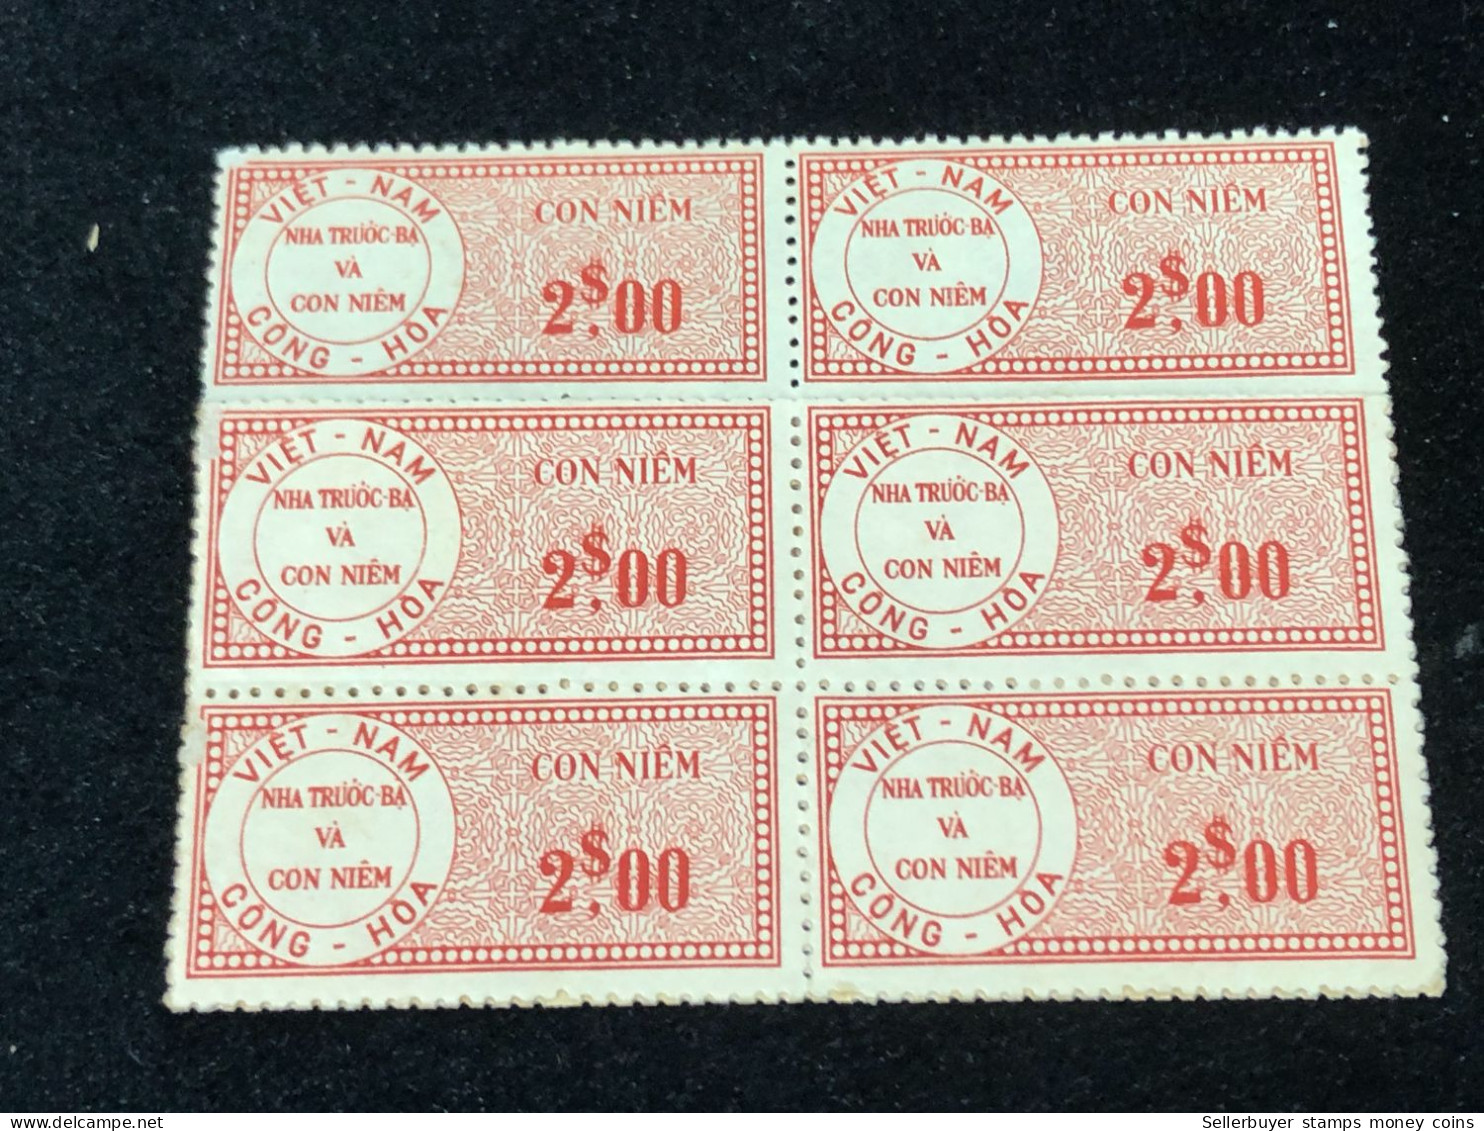 Vietnam South Wedge Before 1975( 2 $ The Wedge Has Not Been Used Yet) 1 Pcs 6 Stamps Quality Good - Collections